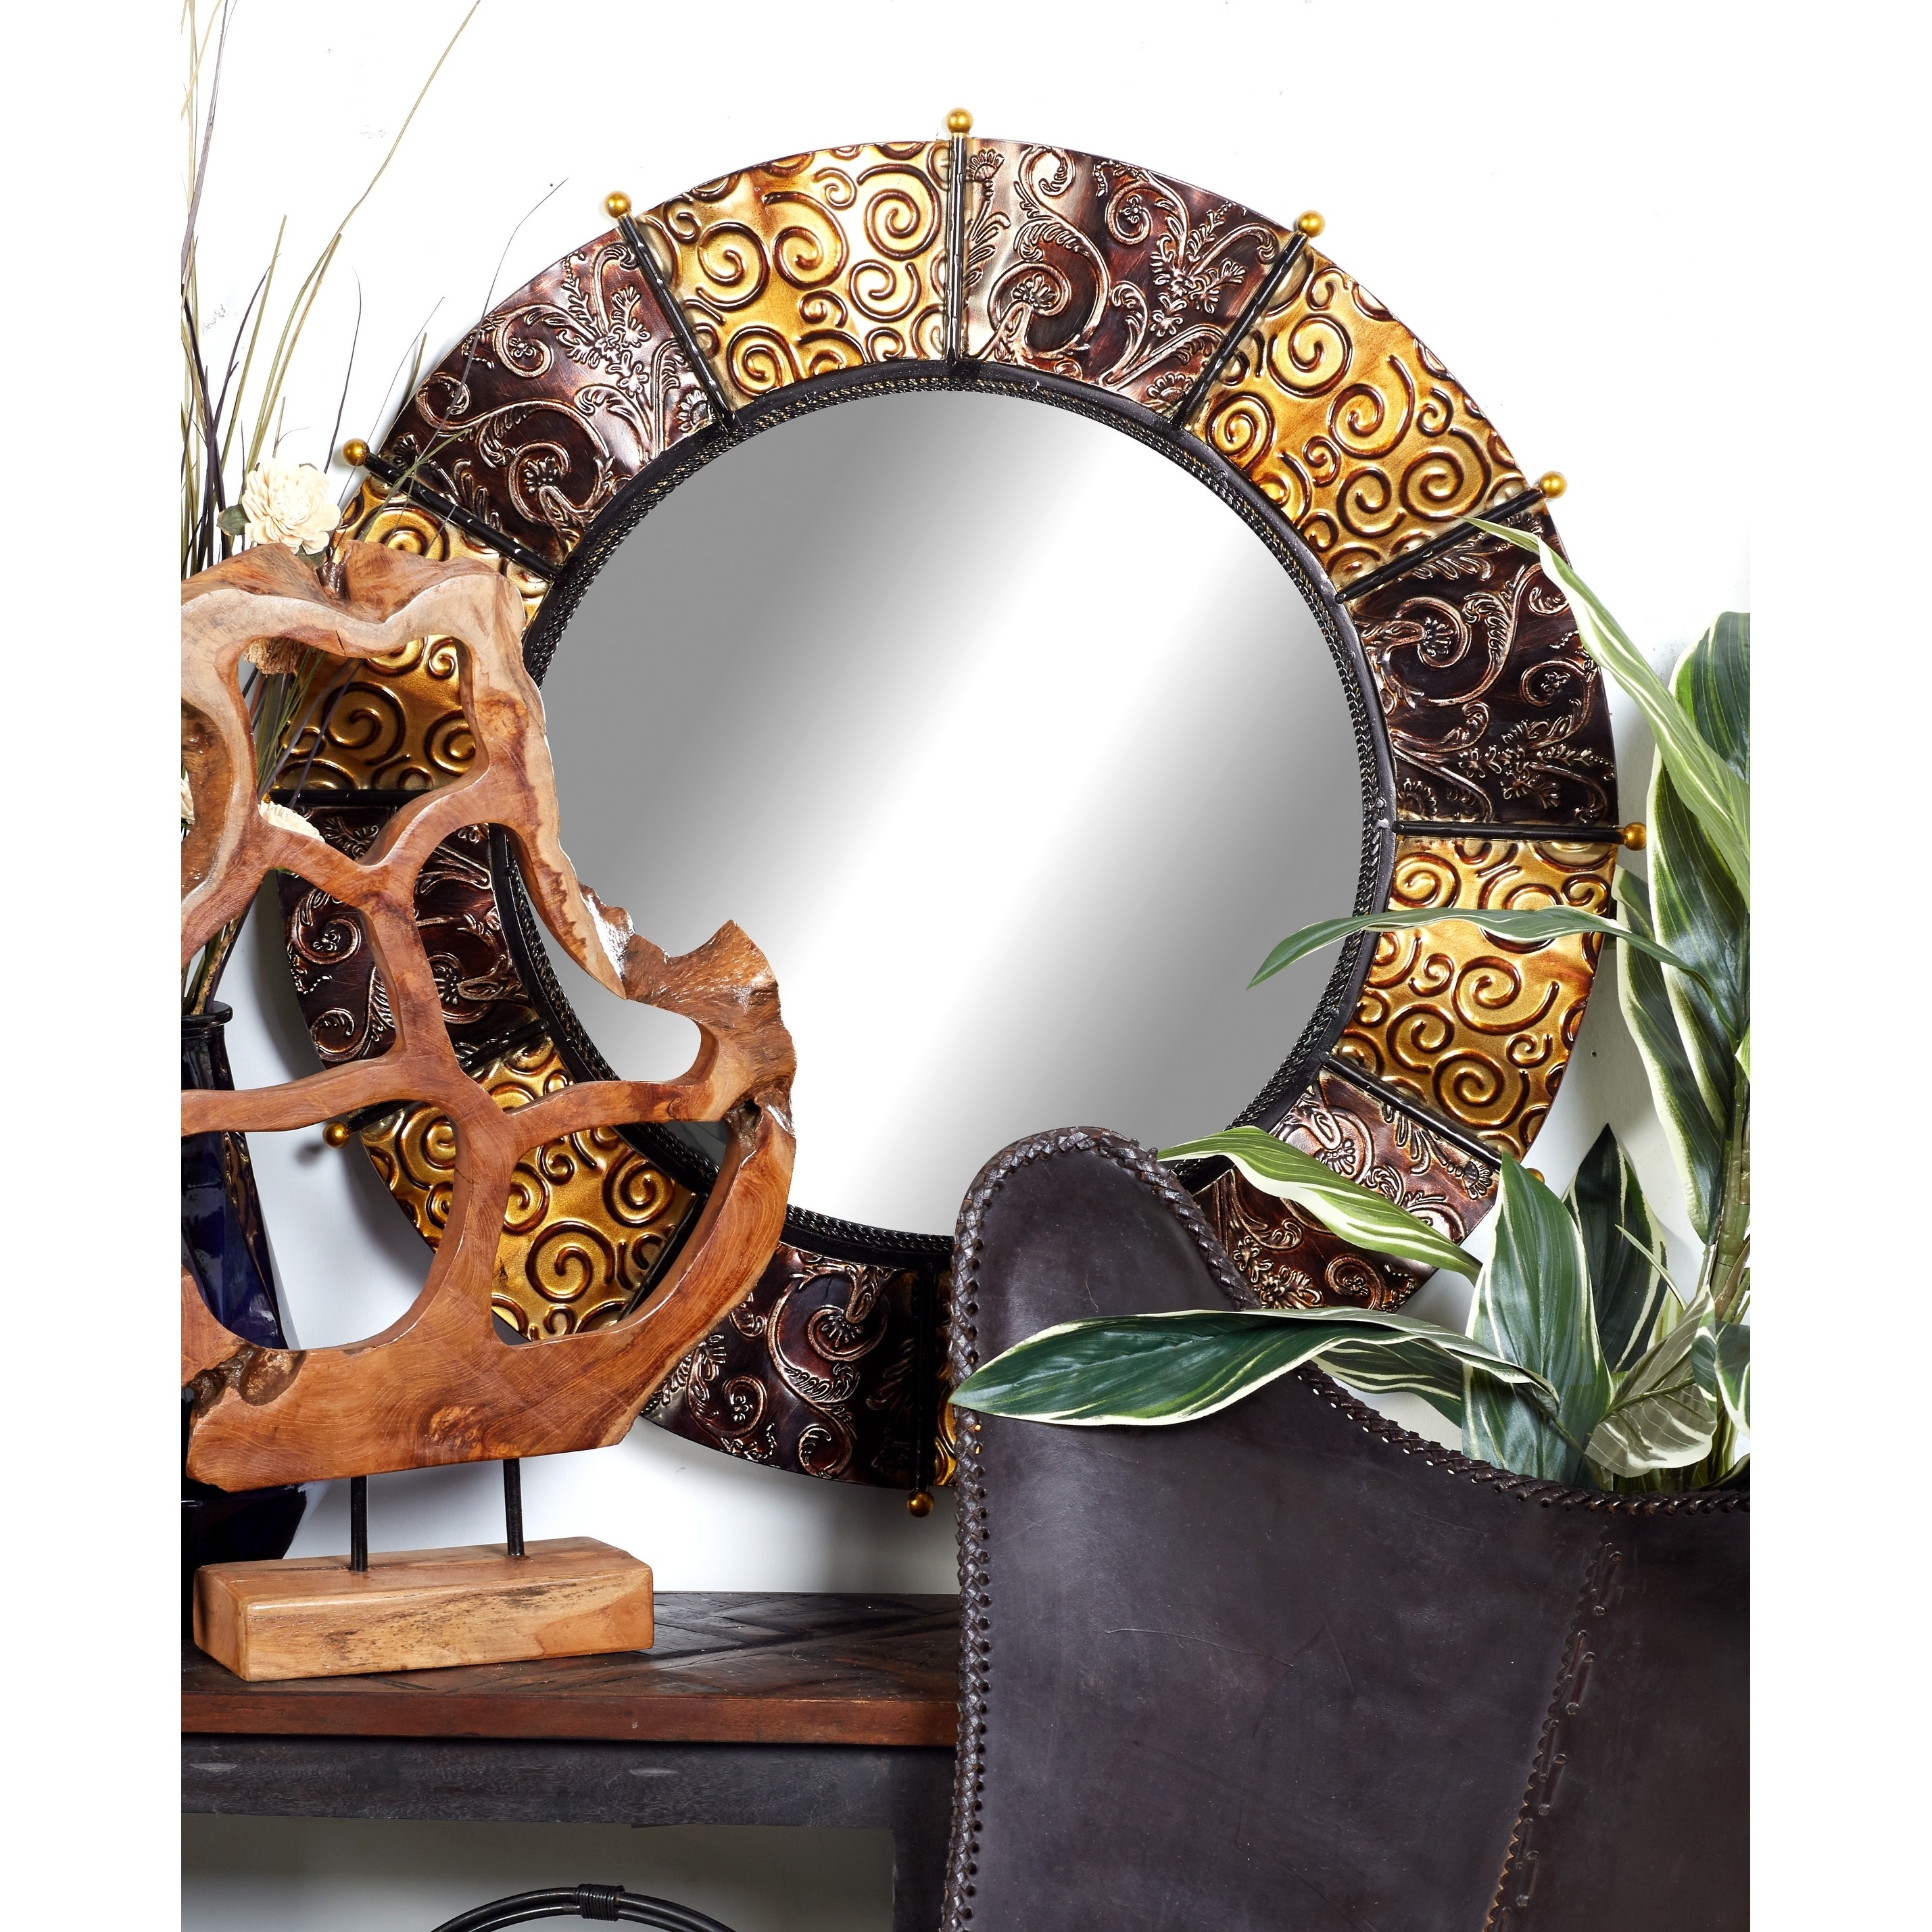 The Curated Nomad Lotta Decorative Metal Mirror 21533313